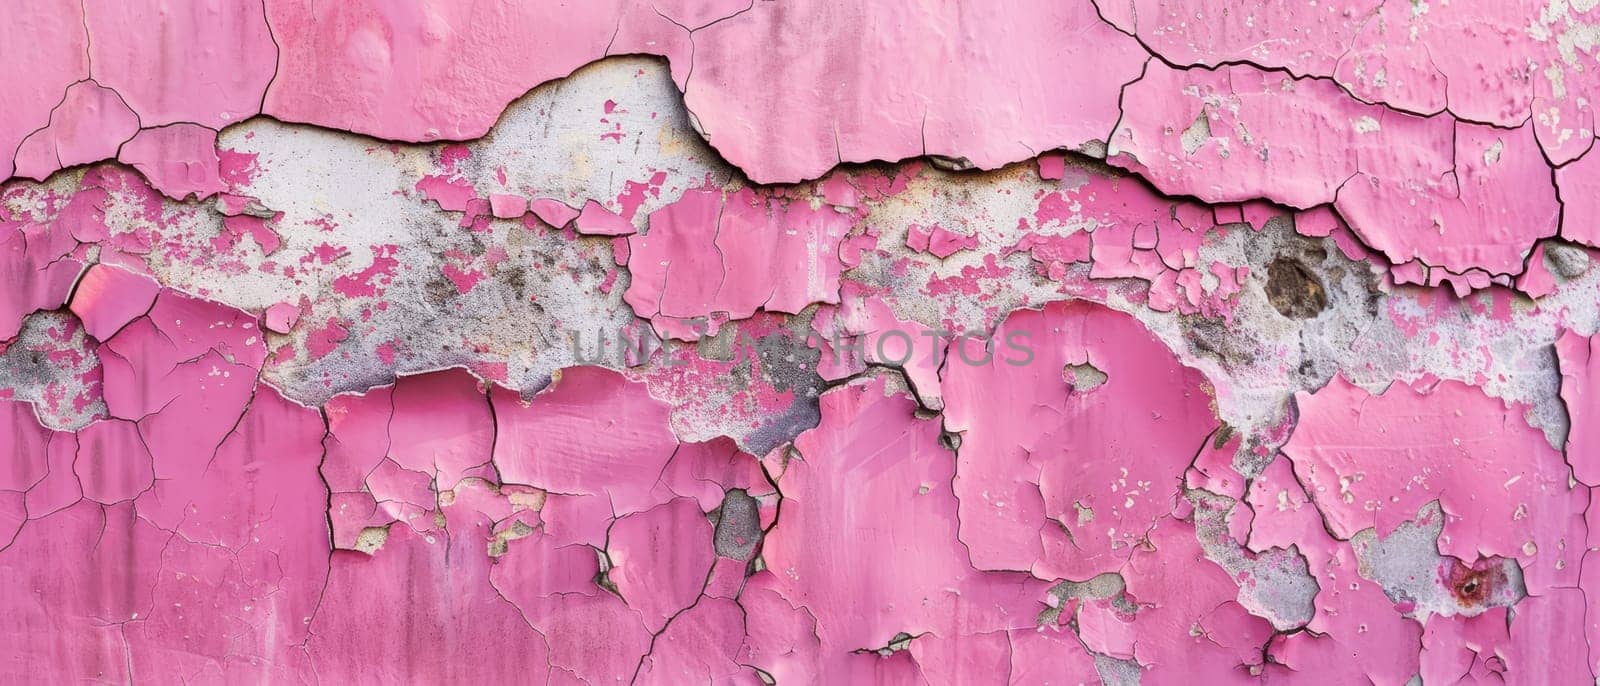 This panoramic image captures the wide expanse of pink decay, where the paint's retreat creates an organic tapestry of weathering and wear. by sfinks